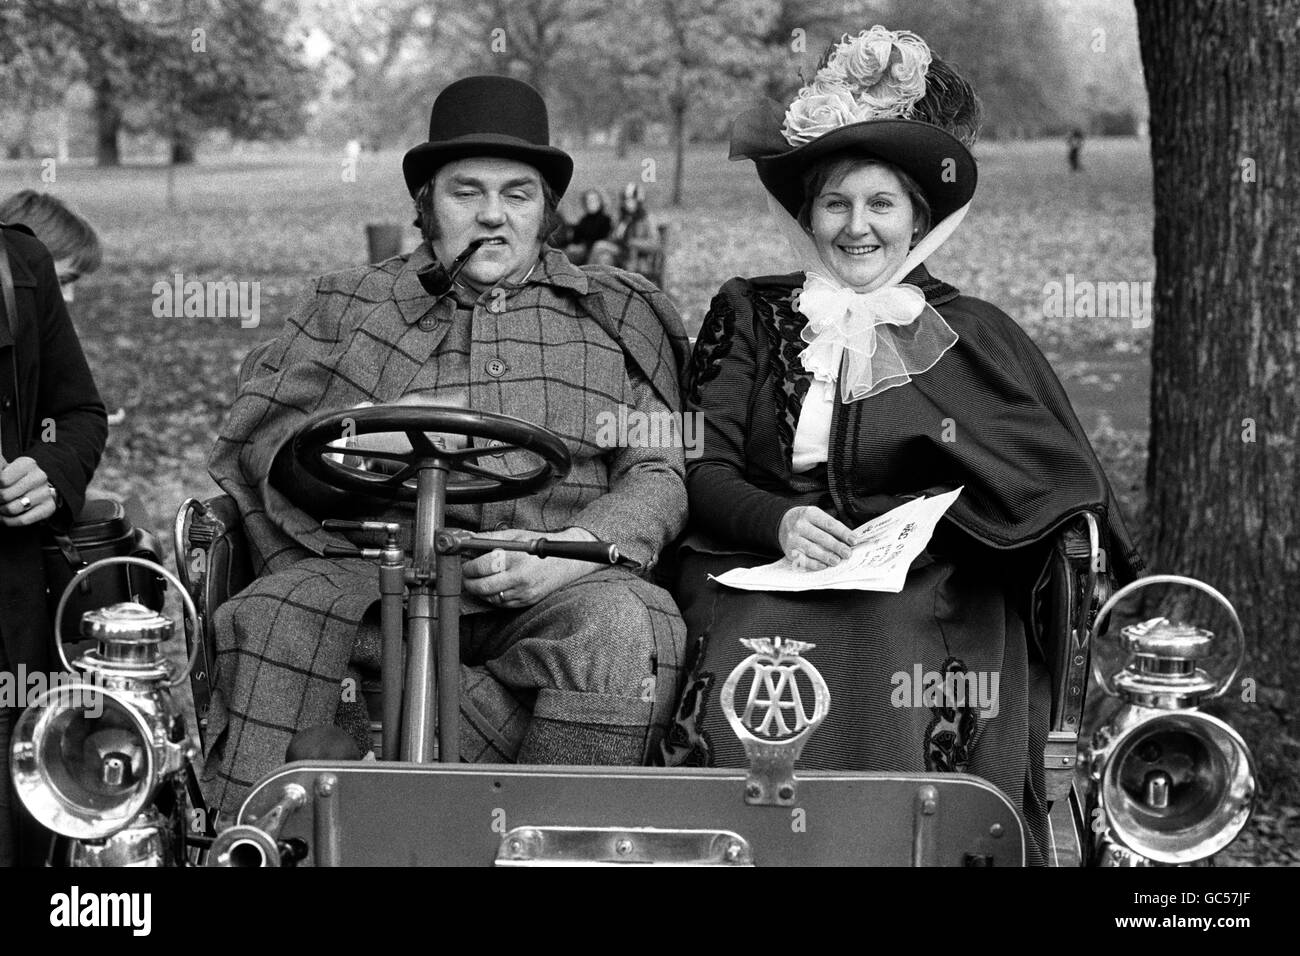 LES DAWSON WITH FIRST WIFE MARGARET IN A 1903 DE DION BOUTON BEFORE SETTING OFF ON THE 1975 LONDON TO BRIGHTON RUN. Stock Photo